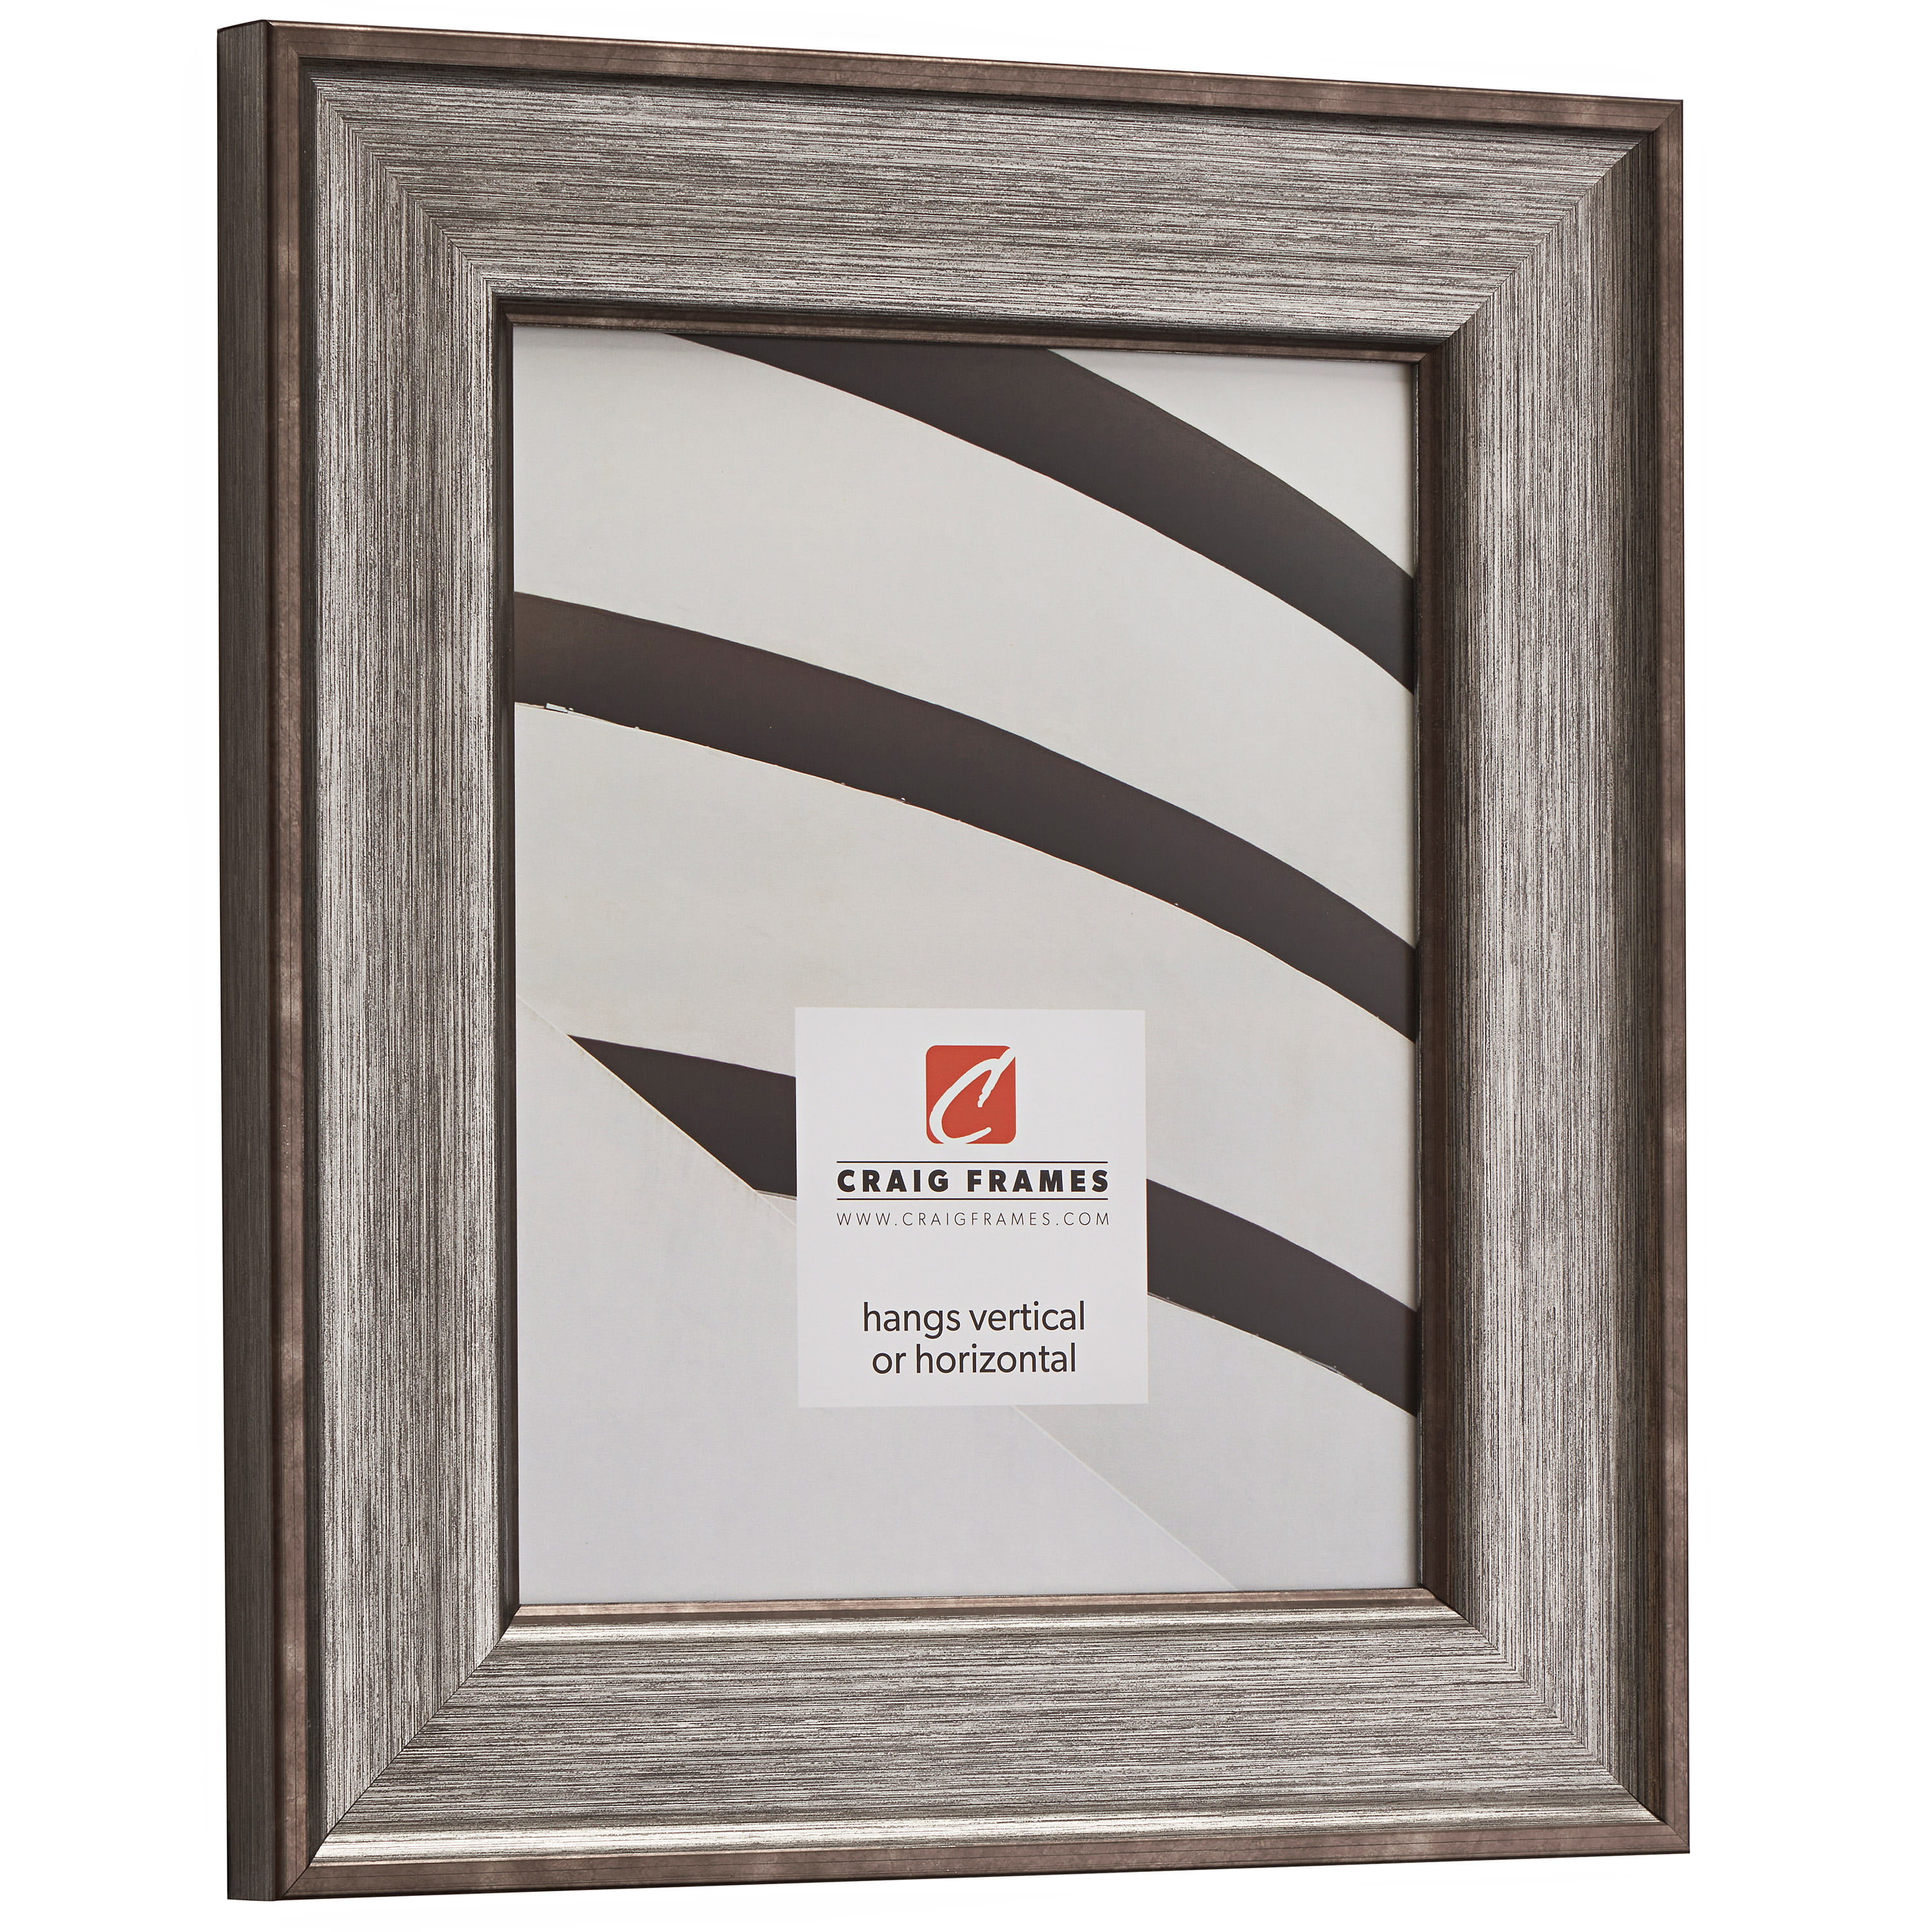 3 Inch Wide Satin Black Picture Frame Details about   Craig Frames Resilience Wide 